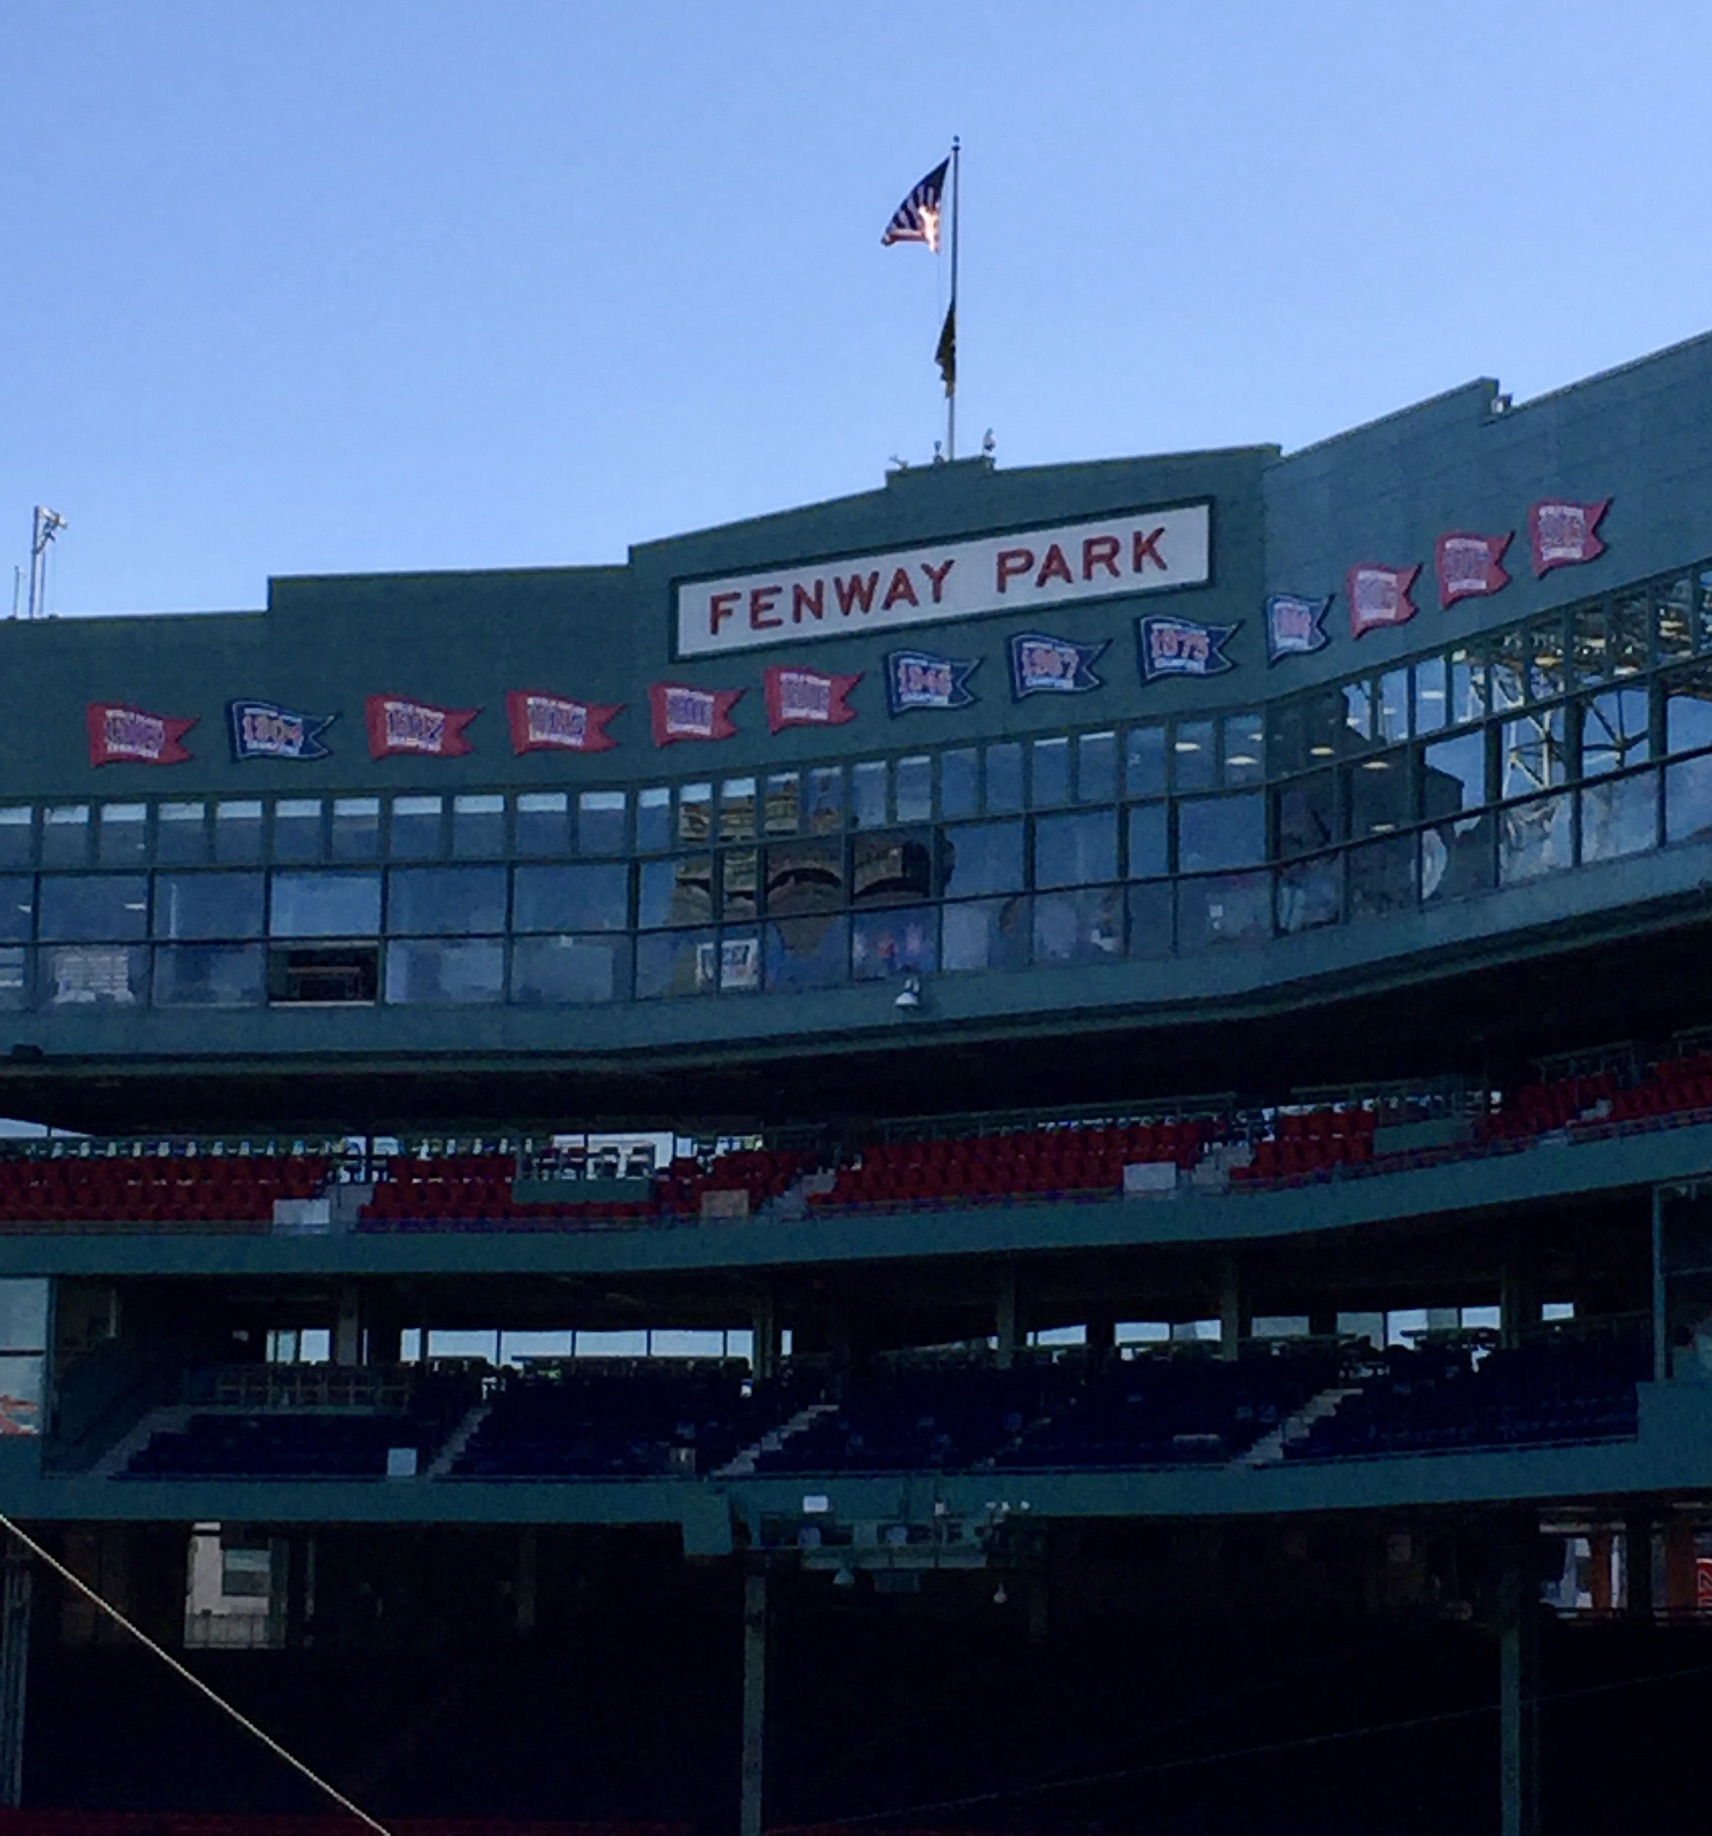 The Fenway Park Box Offices, with all of their winning banners above.